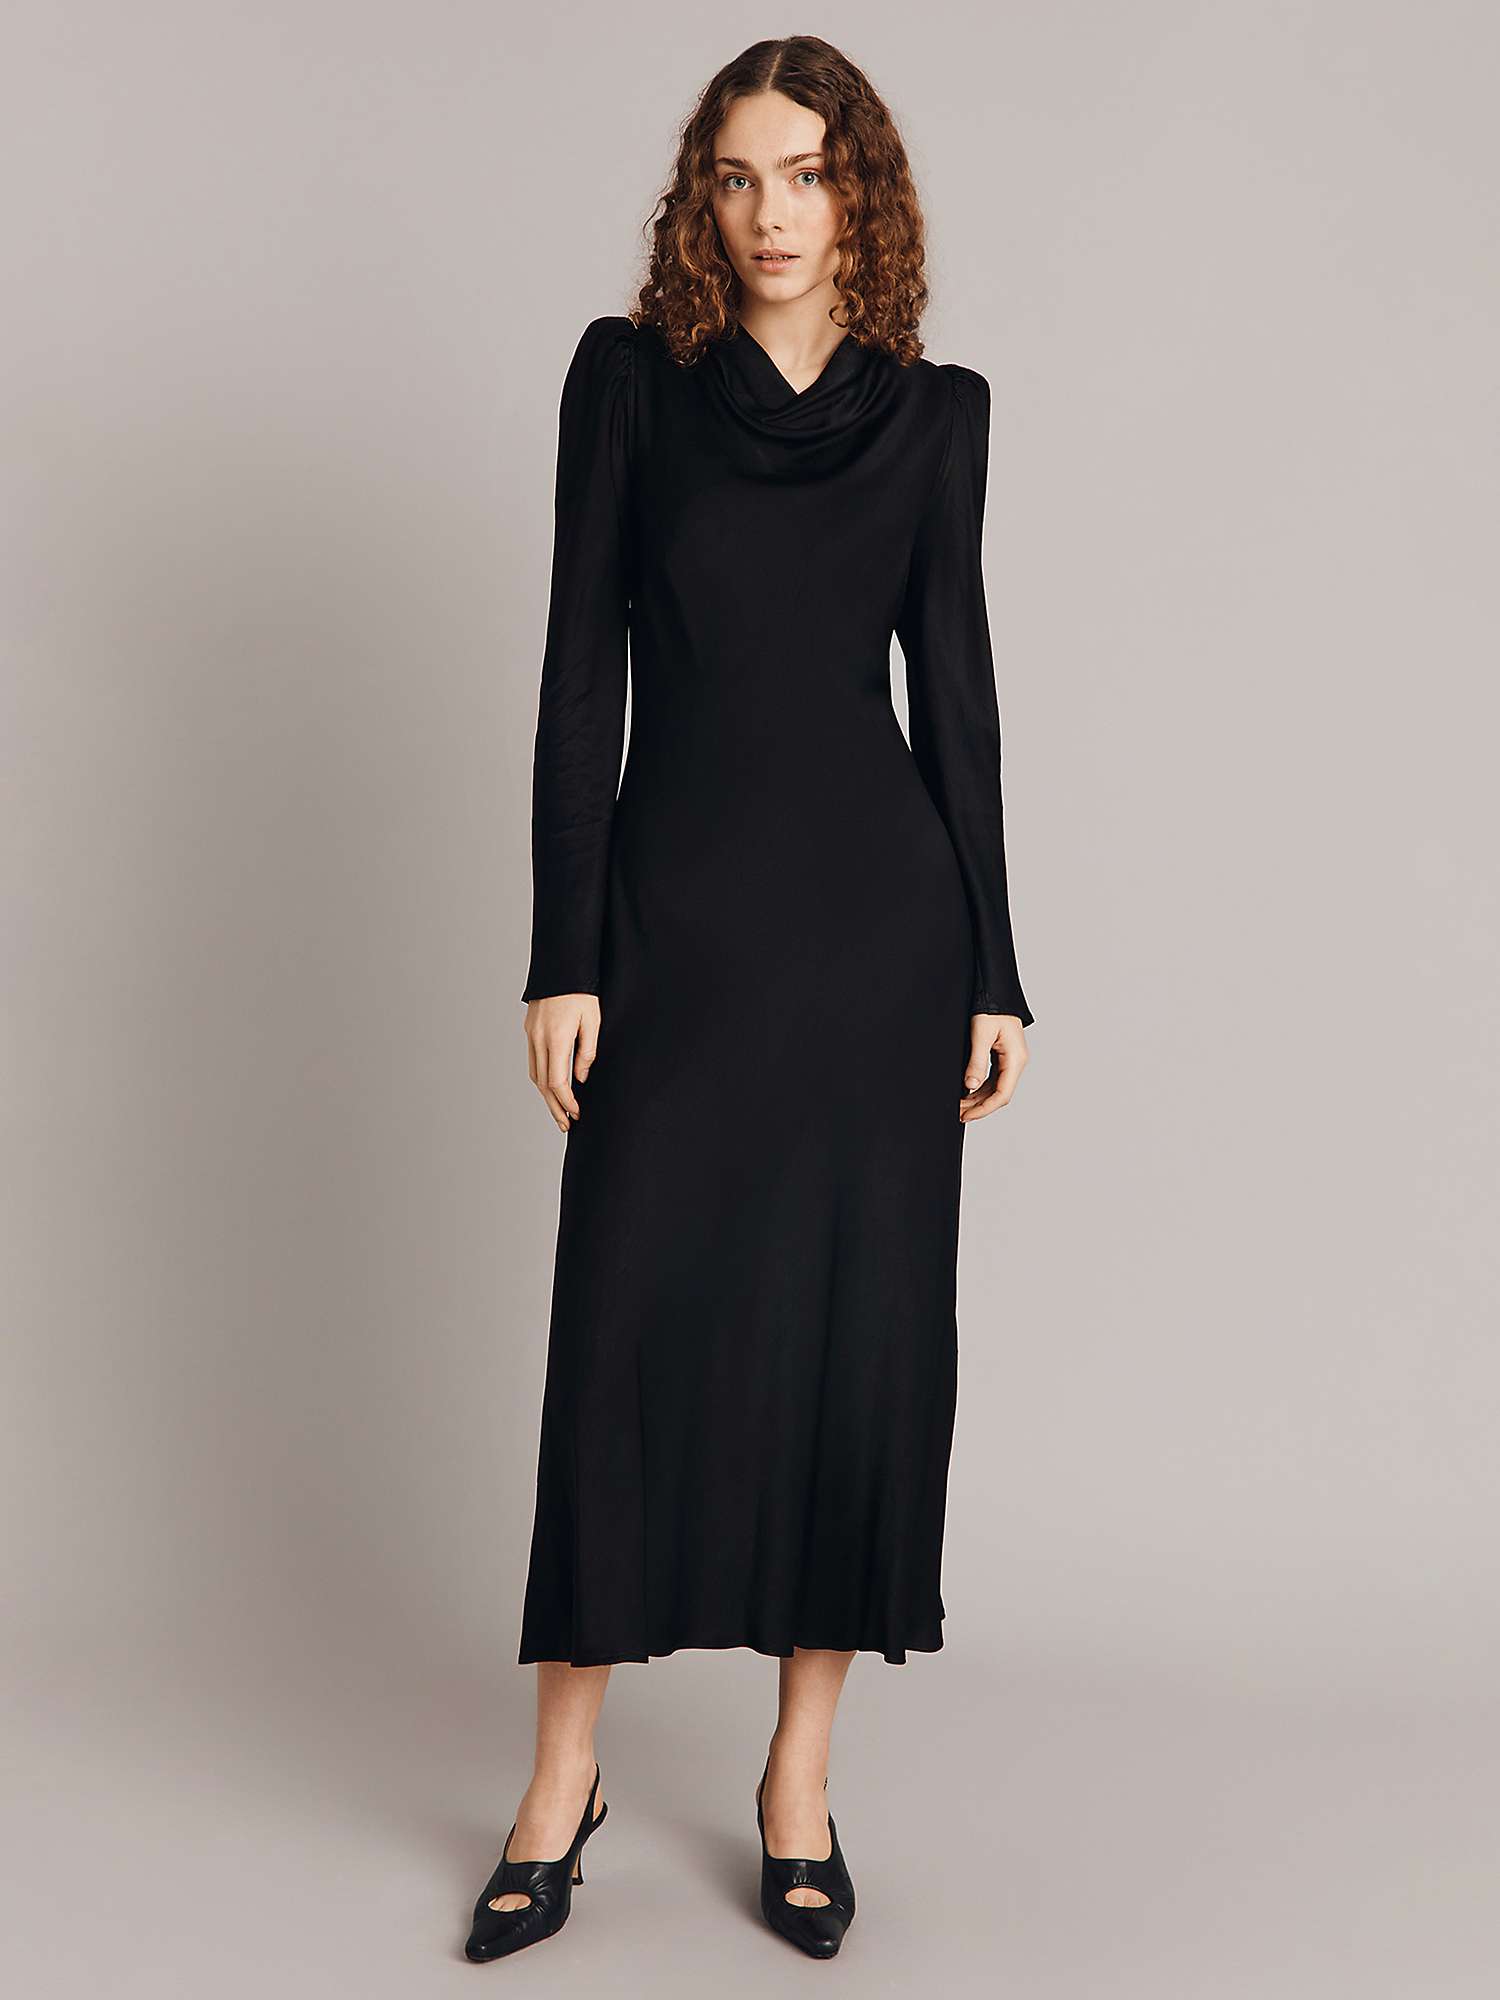 Buy Ghost Frankie Cowl Neck Maxi Dress Online at johnlewis.com